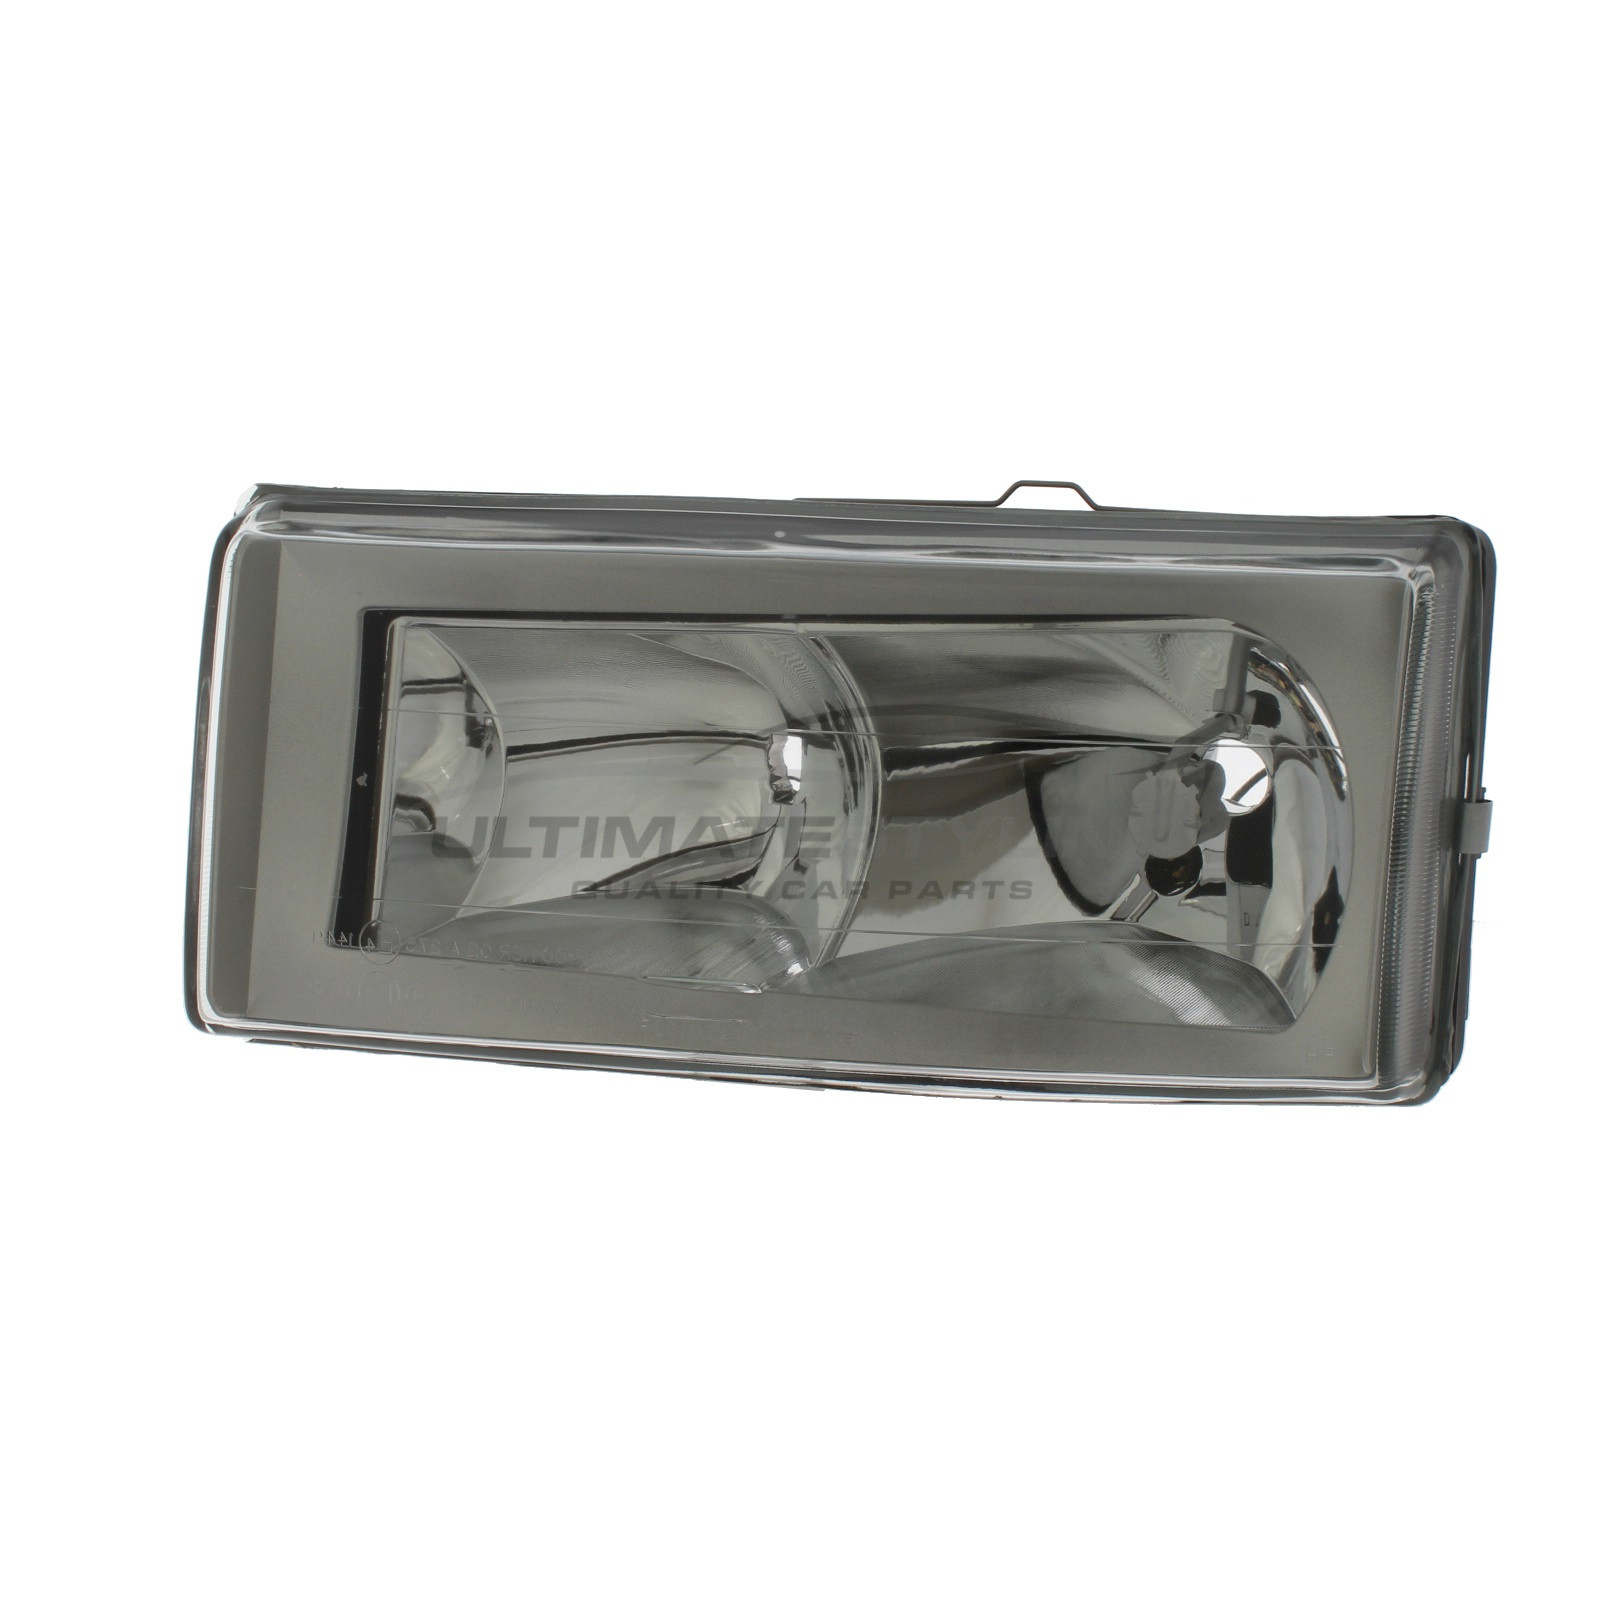 Iveco Daily 1999-2006 Halogen, Electric Without Motor, Chrome Headlight / Headlamp Passengers Side (LH)